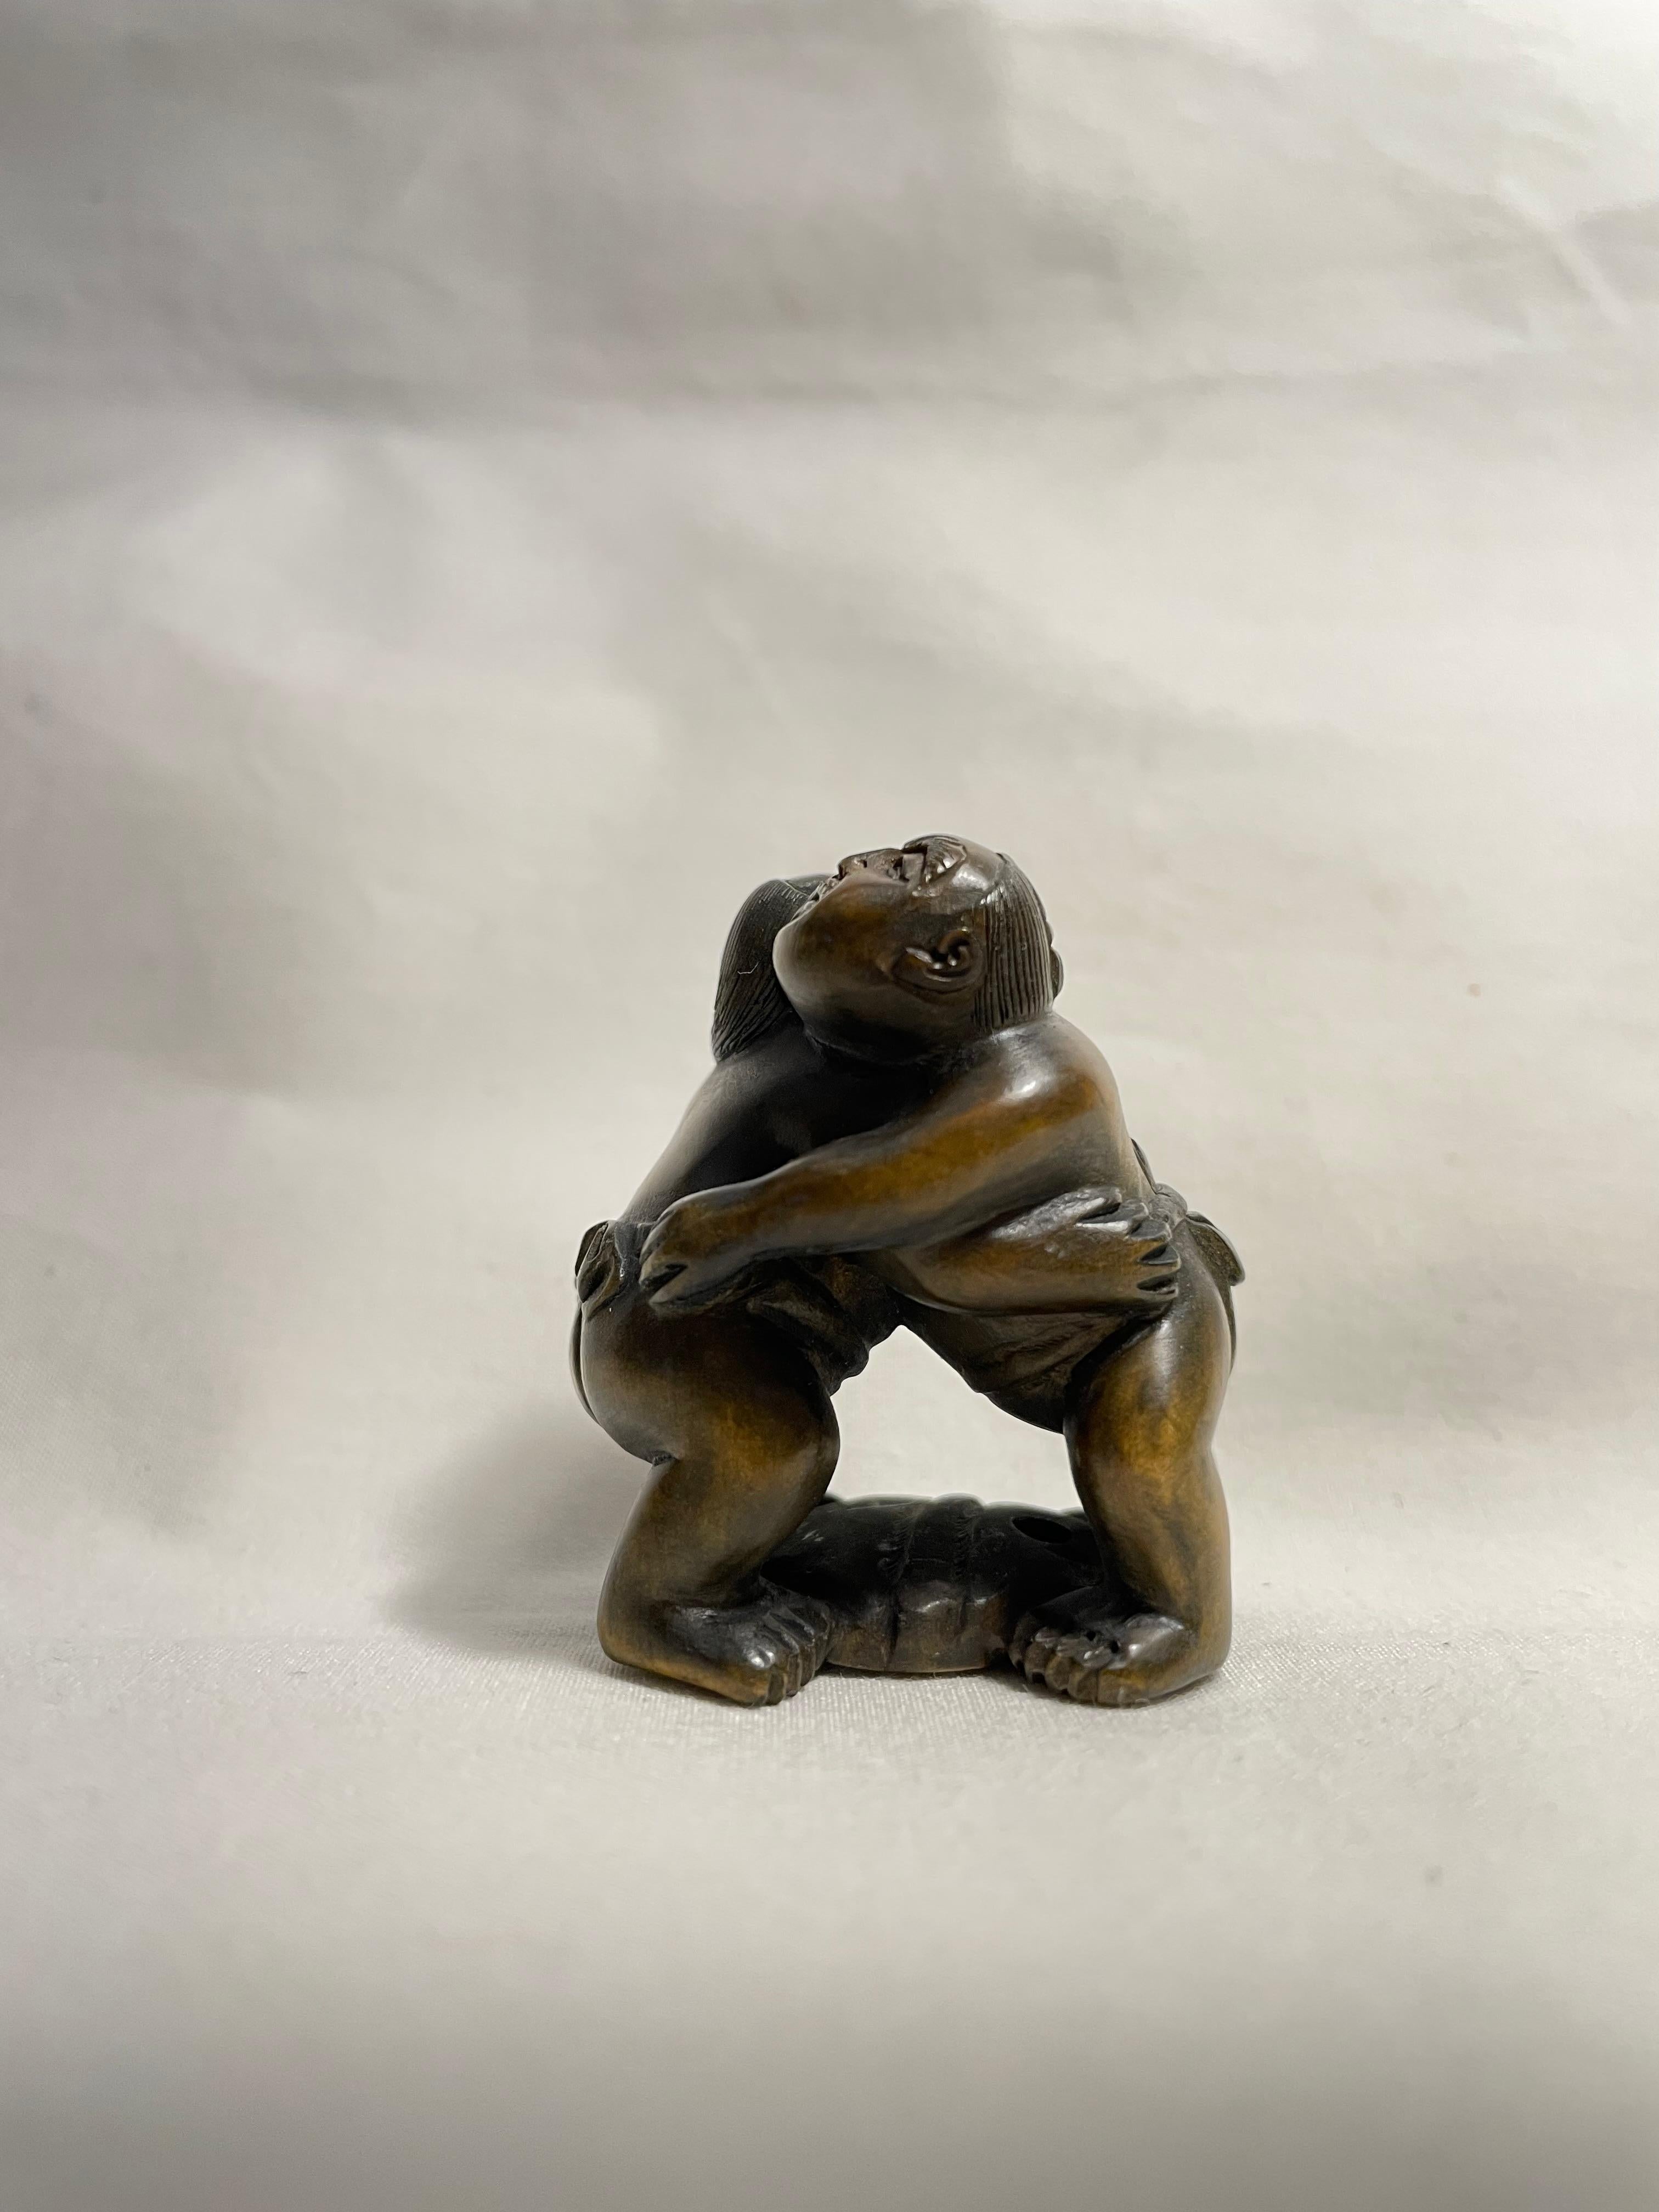 This is an antique netsuke made in Japan around Showa period 1920s.
This netsuke was made by a netsuke artist 'Matsuyama' (you can find his signature on the bottom of this netsuke.)

Netsuke is a miniature sculpture, originating in 17th century